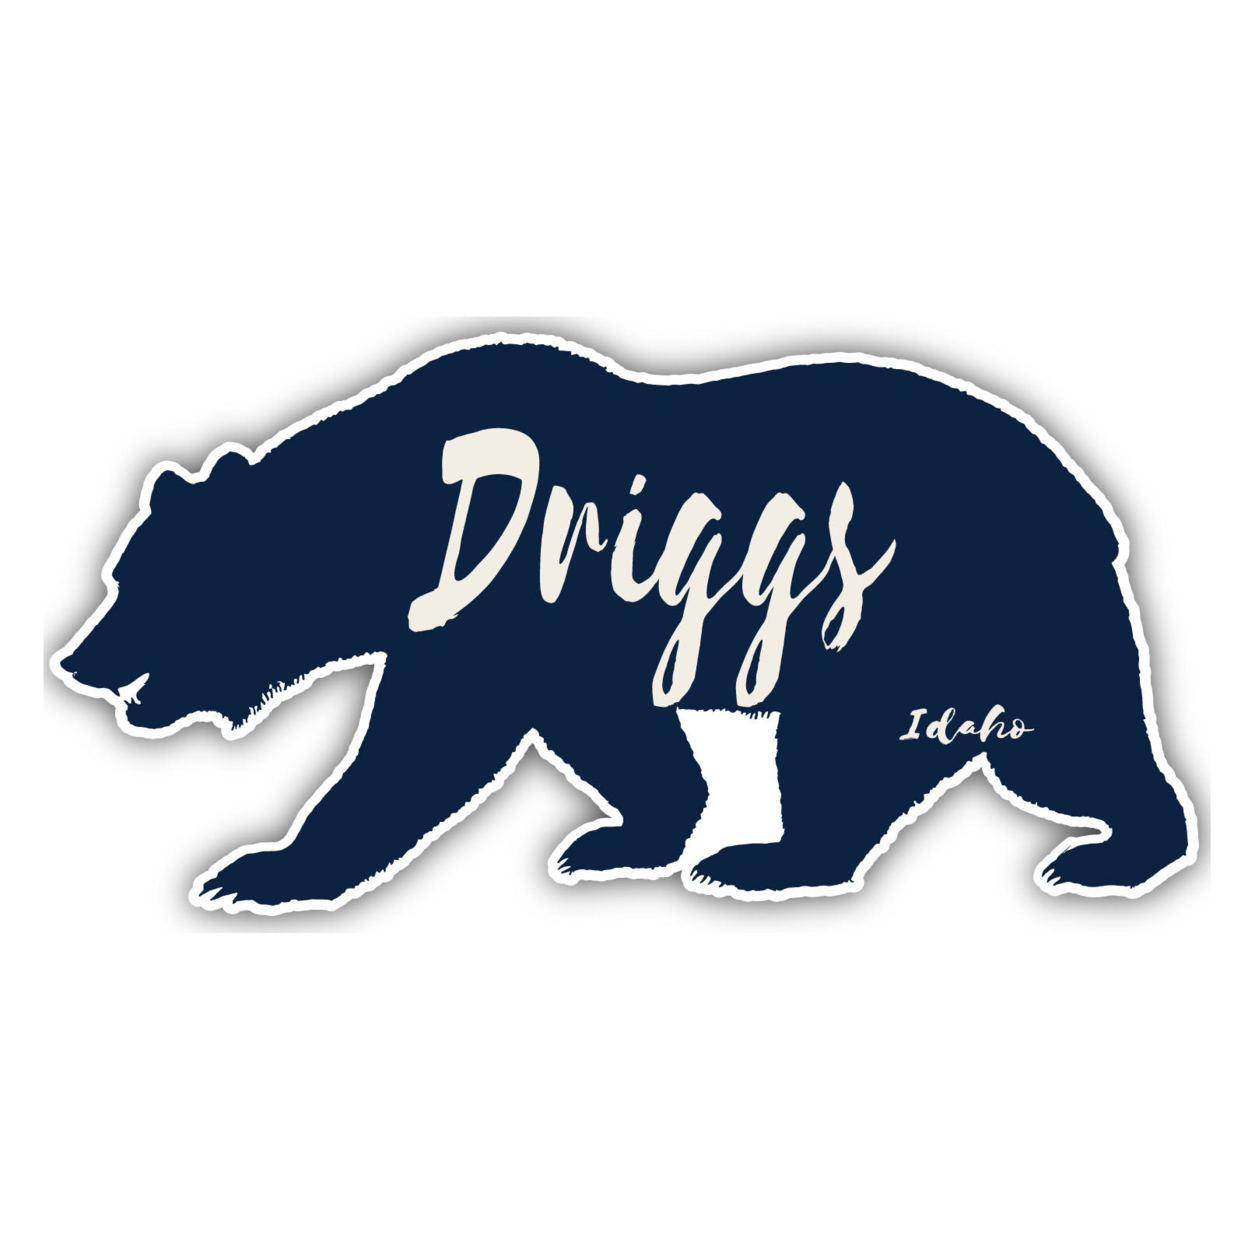 Driggs Idaho Souvenir Decorative Stickers (Choose Theme And Size) - 4-Pack, 6-Inch, Tent